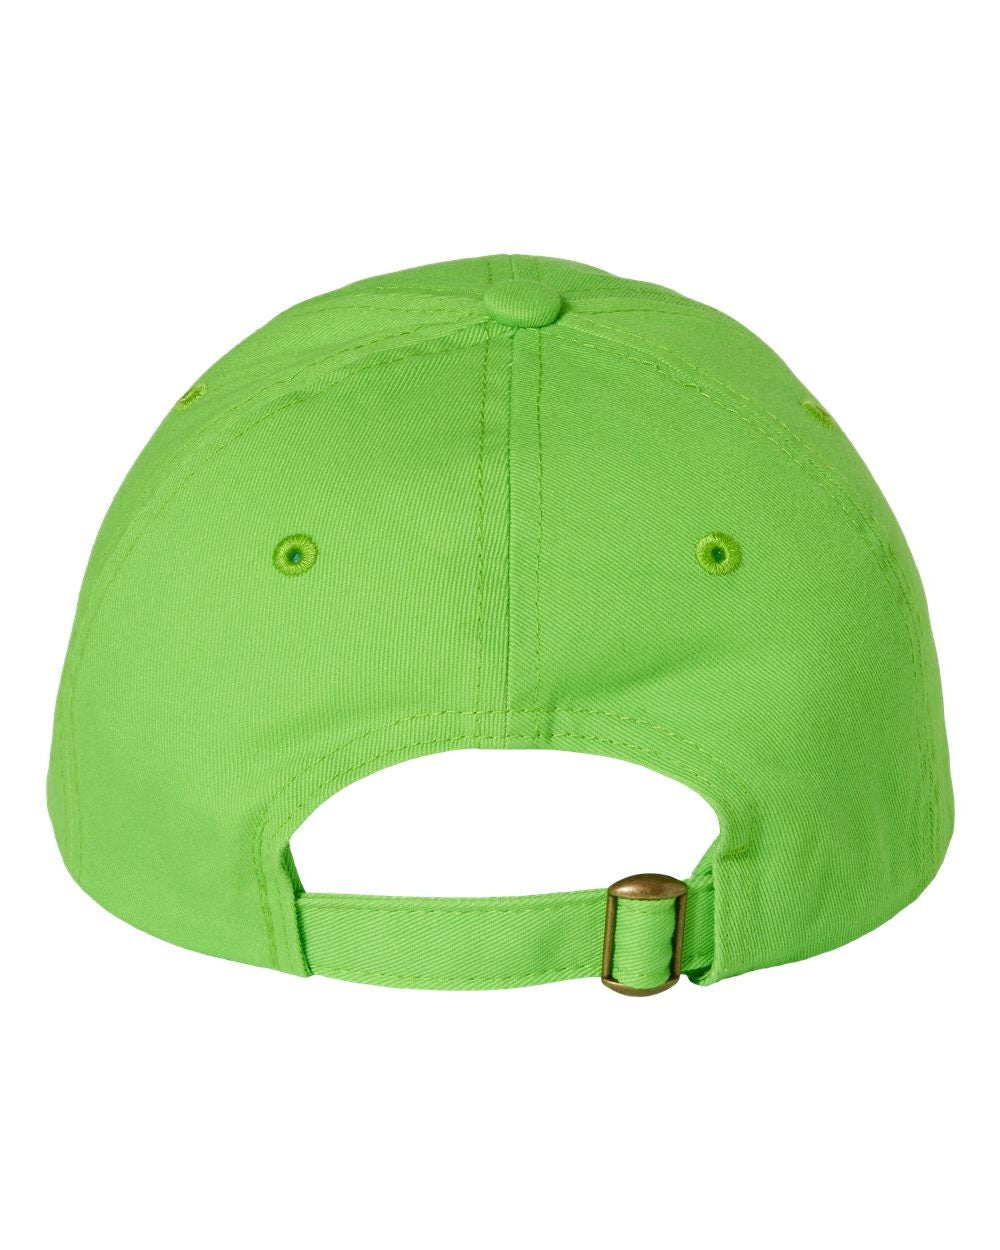 Stacked Lucky's St. Patrick's Day Embroidered Dad Hat | Lime Green Baseball Cap | St. Paddy's Day